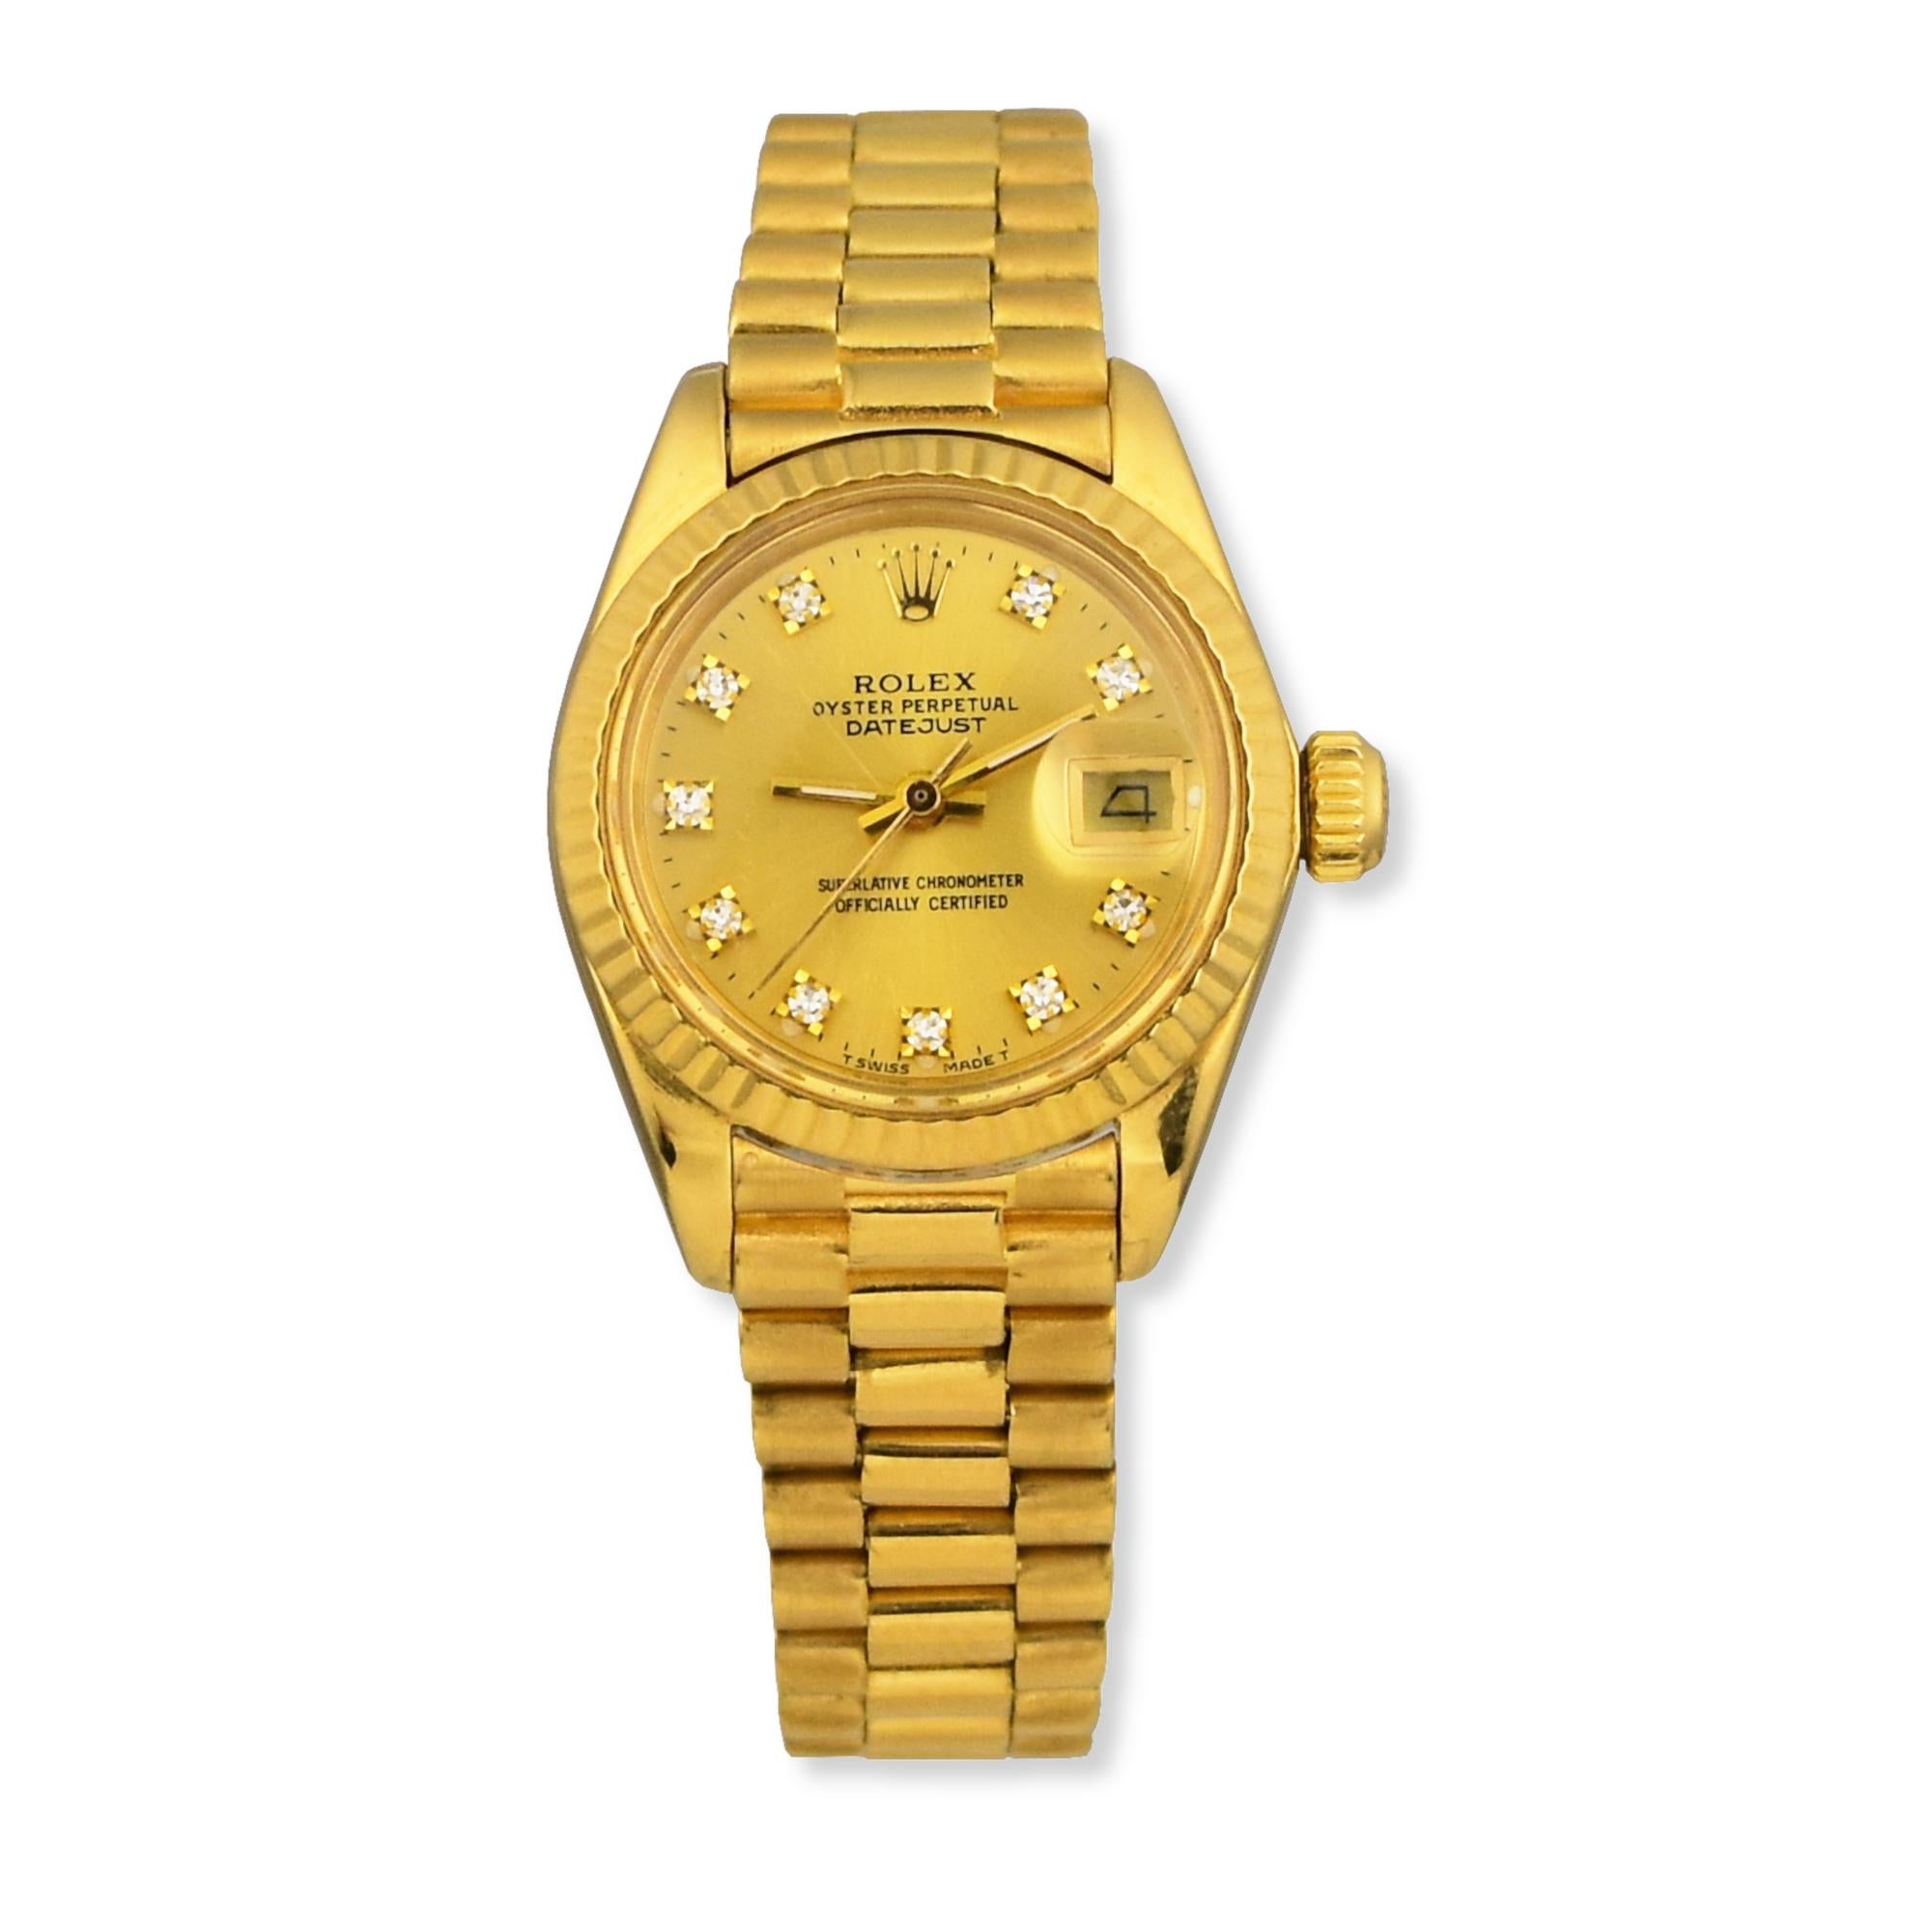 Brand: Rolex
Dial: Gold
Band Material: 18k Yellow Gold
Case Material: 18k Yellow Gold
Case size: 28mm
Hour Markers: Diamond Dial Hour Marker
Bezel: Rolex Fluted Bezel
 It has an original 18k yellow gold president band to give it the slickest look.